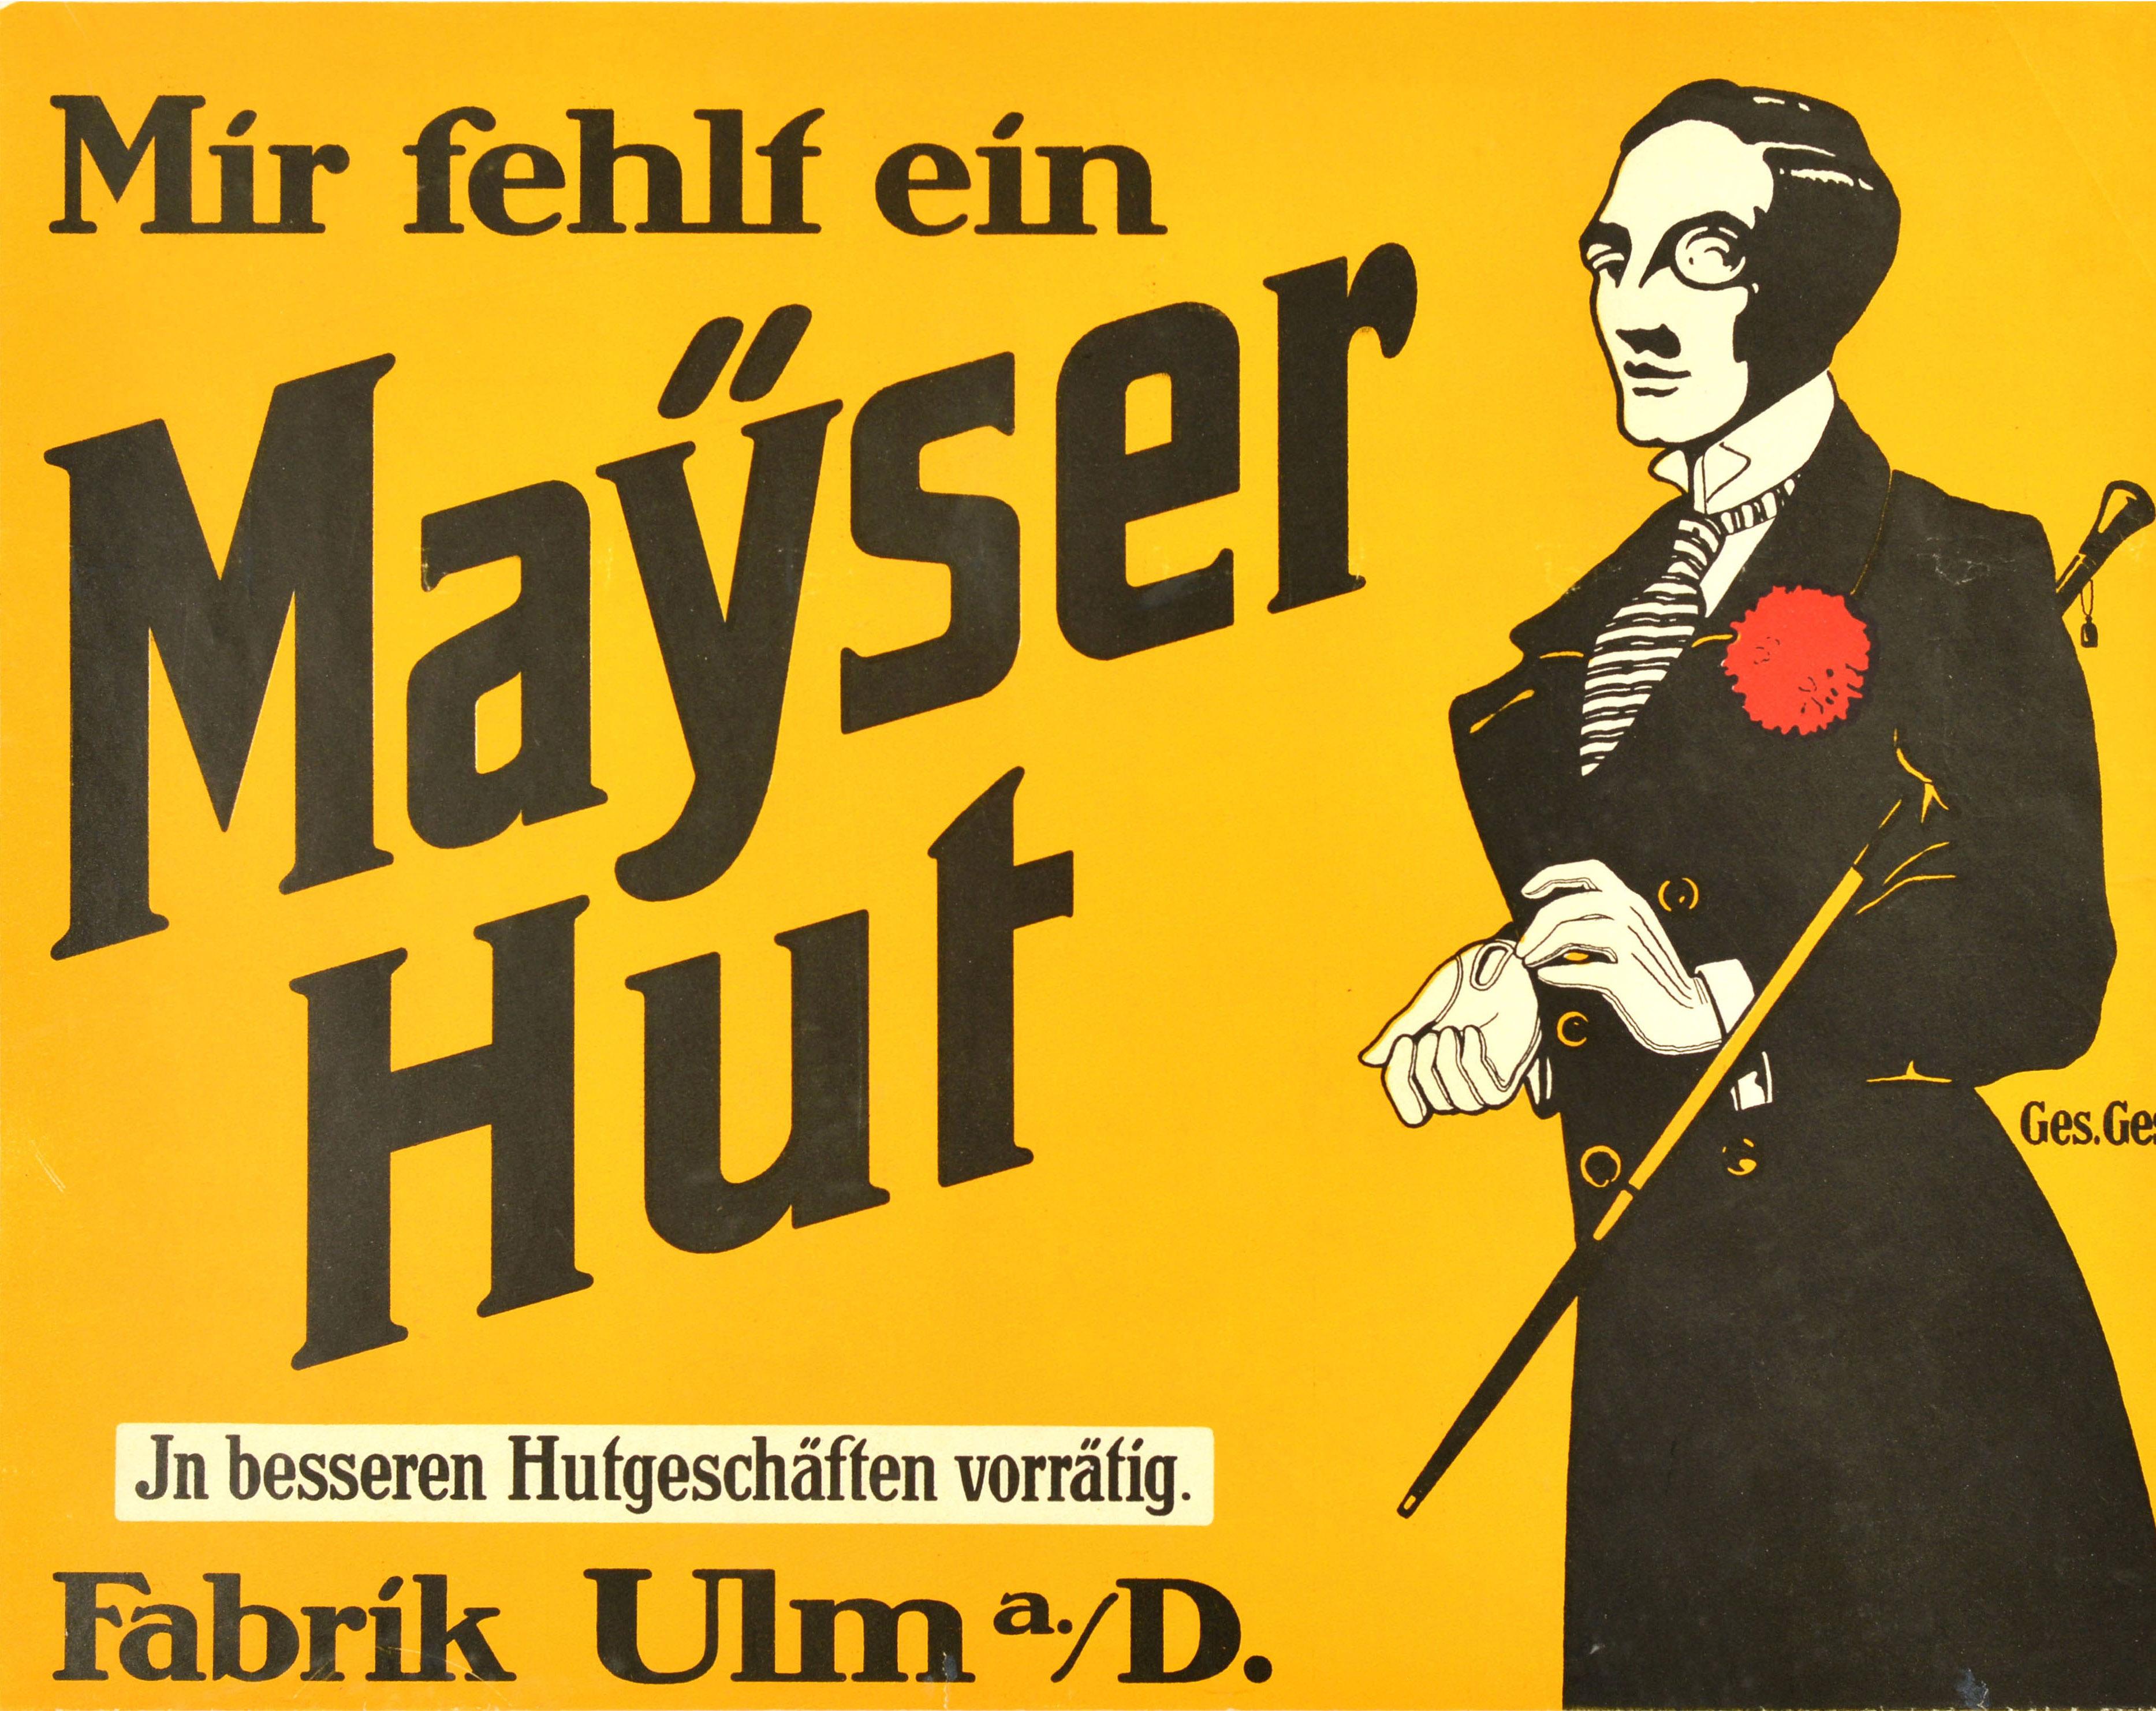 Original antique advertising poster - I'm missing a Mayser Hat / Mir fehlt ein Mayser Hut - featuring a great design depicting a smartly dressed man wearing a suit with a red rosette flower in the pocket, a monocle eye glass, gloves and holding a